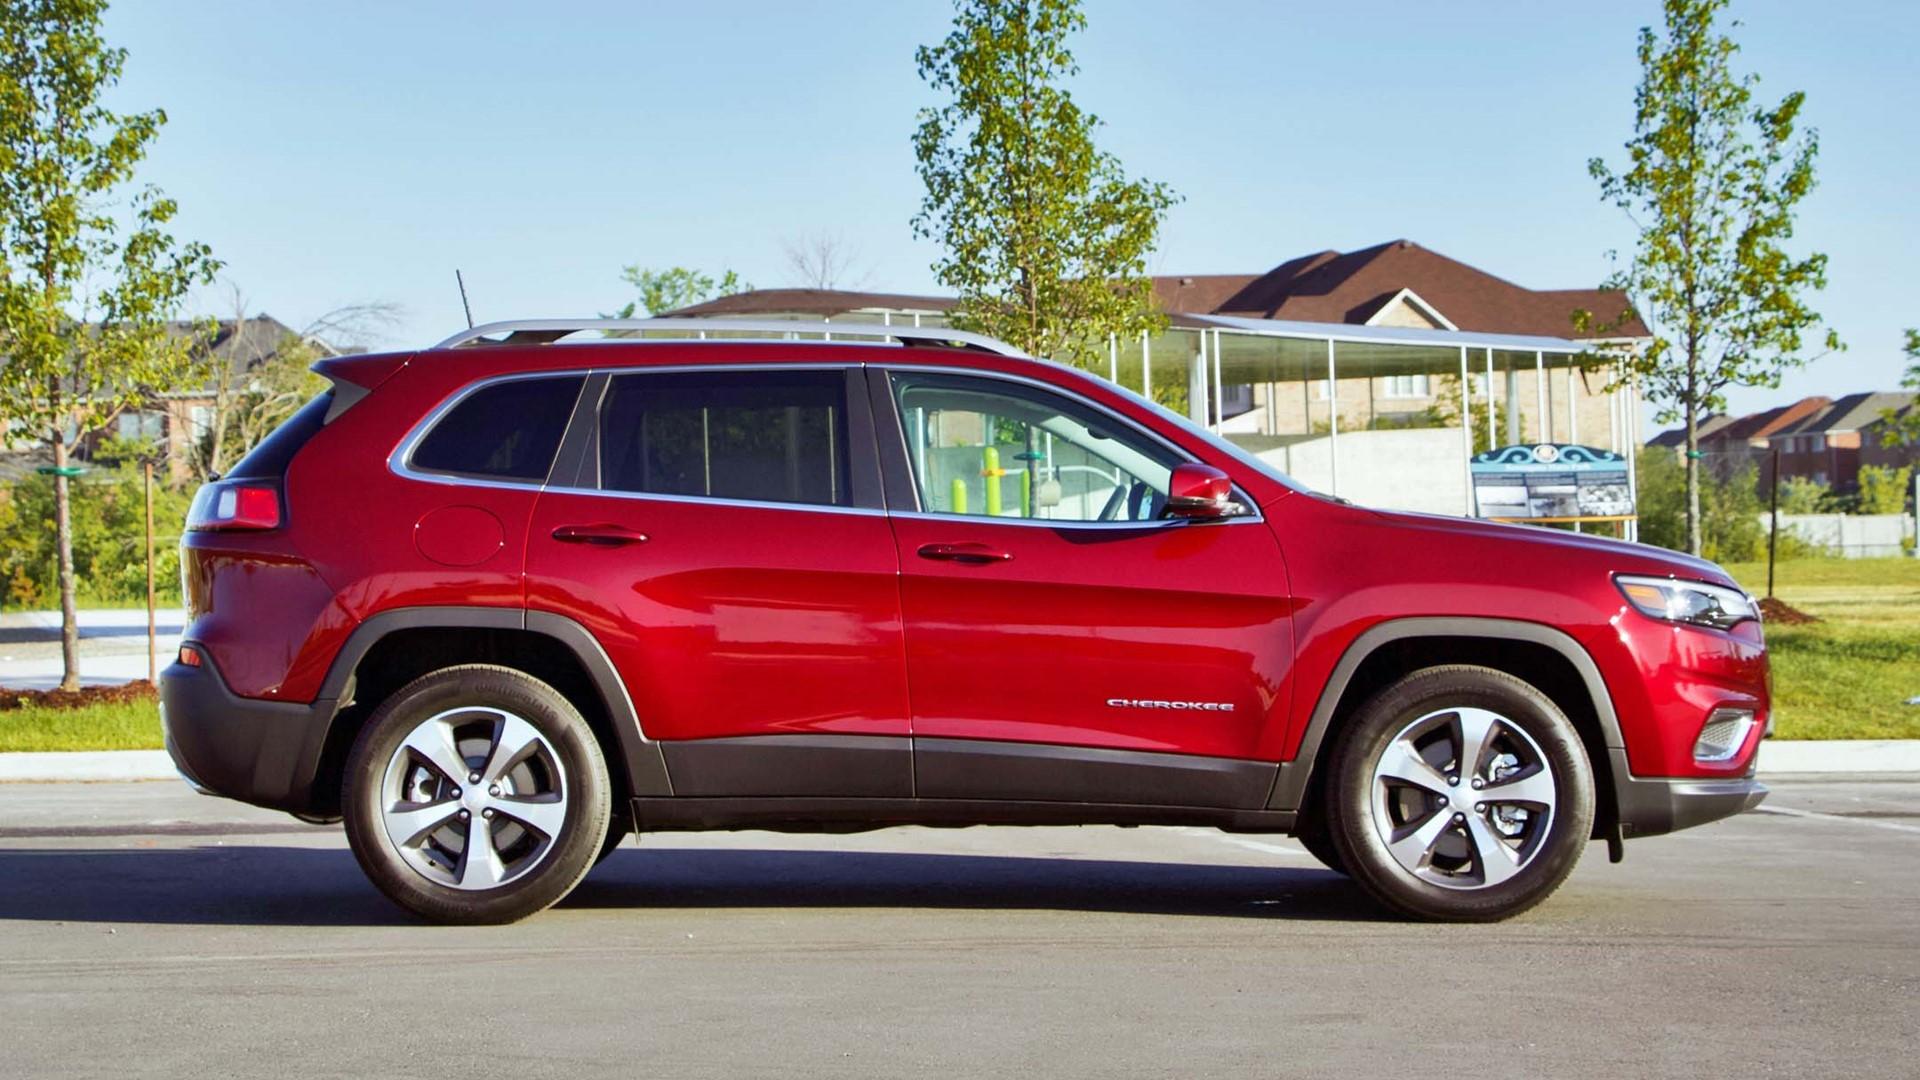 Jeep Cherokee Limited 4x4 Test Drive Review